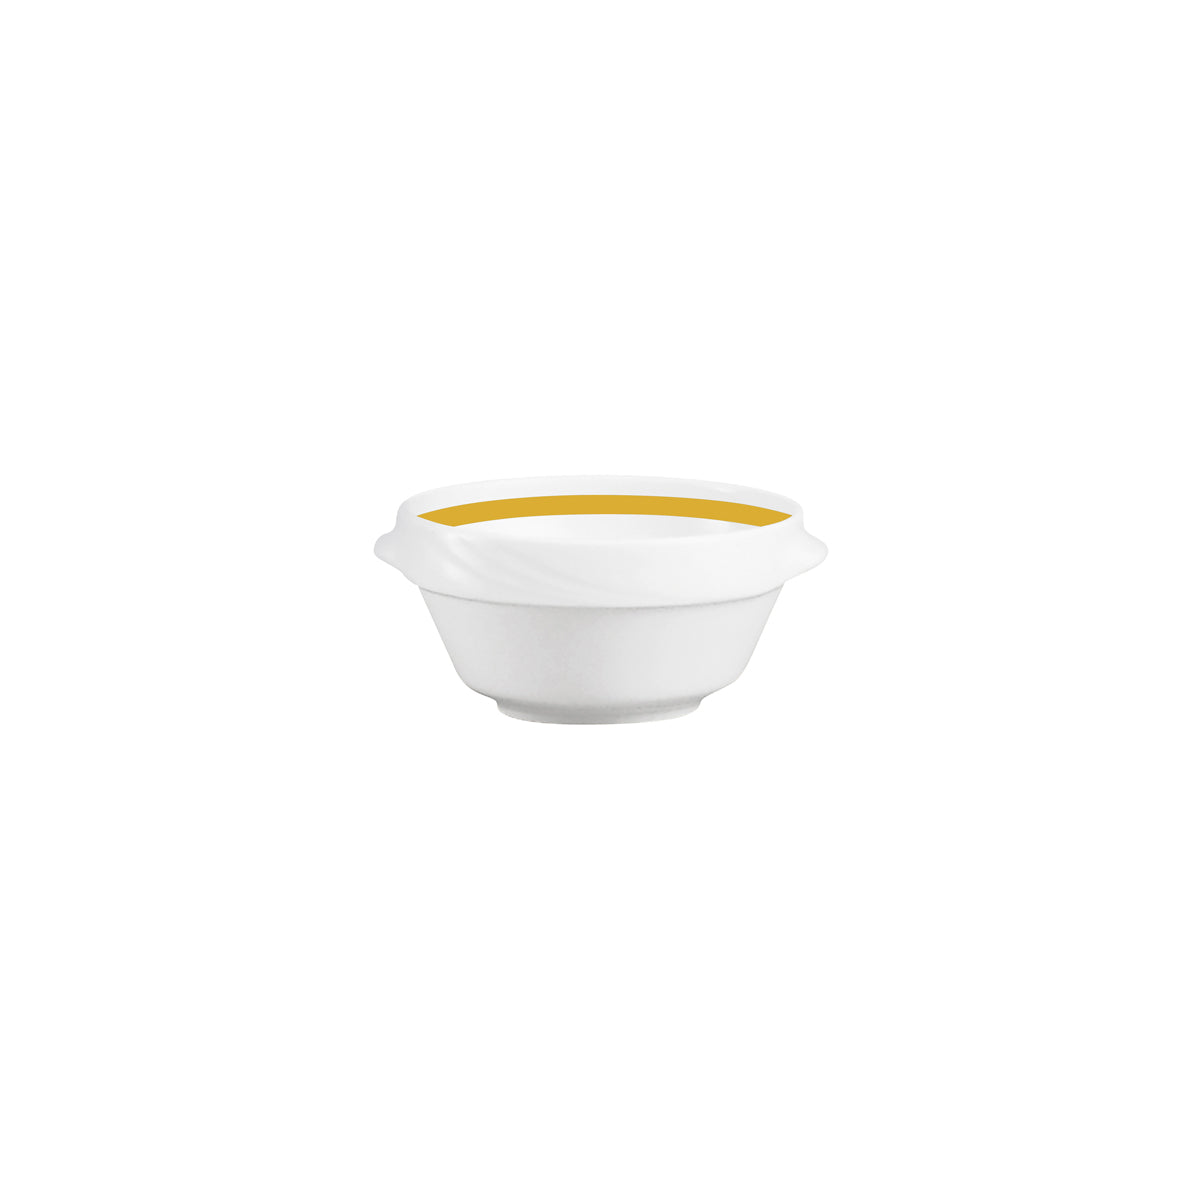 SH9185750/62981 Donna Senior Decor Stackable Round Soup Bowl with Yellow Band 132x67mm / 500ml Tomkin Australia Hospitality Supplies